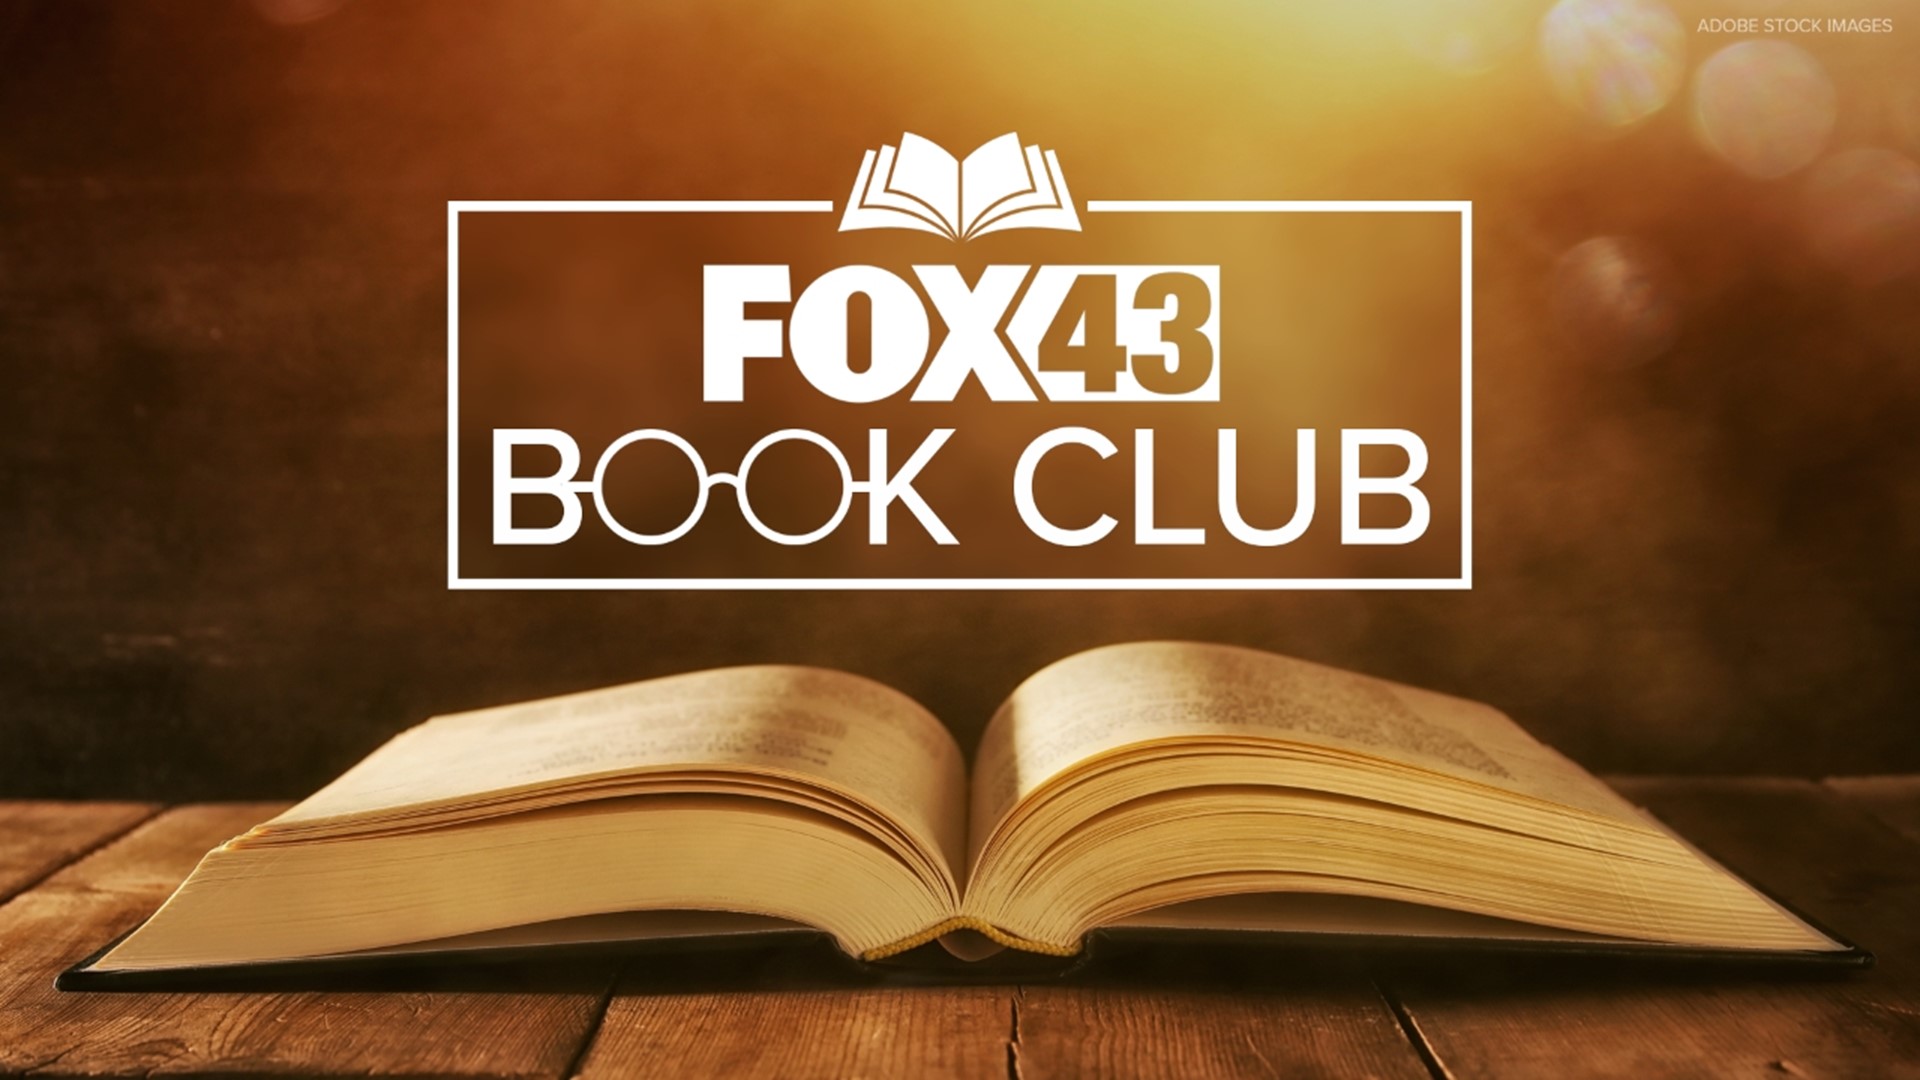 FOX43's Ally Debicki and Martin Library's Mina Edmondson introduced the first book to be featured in the FOX43 Book Club. The discussion will take place on March 28.